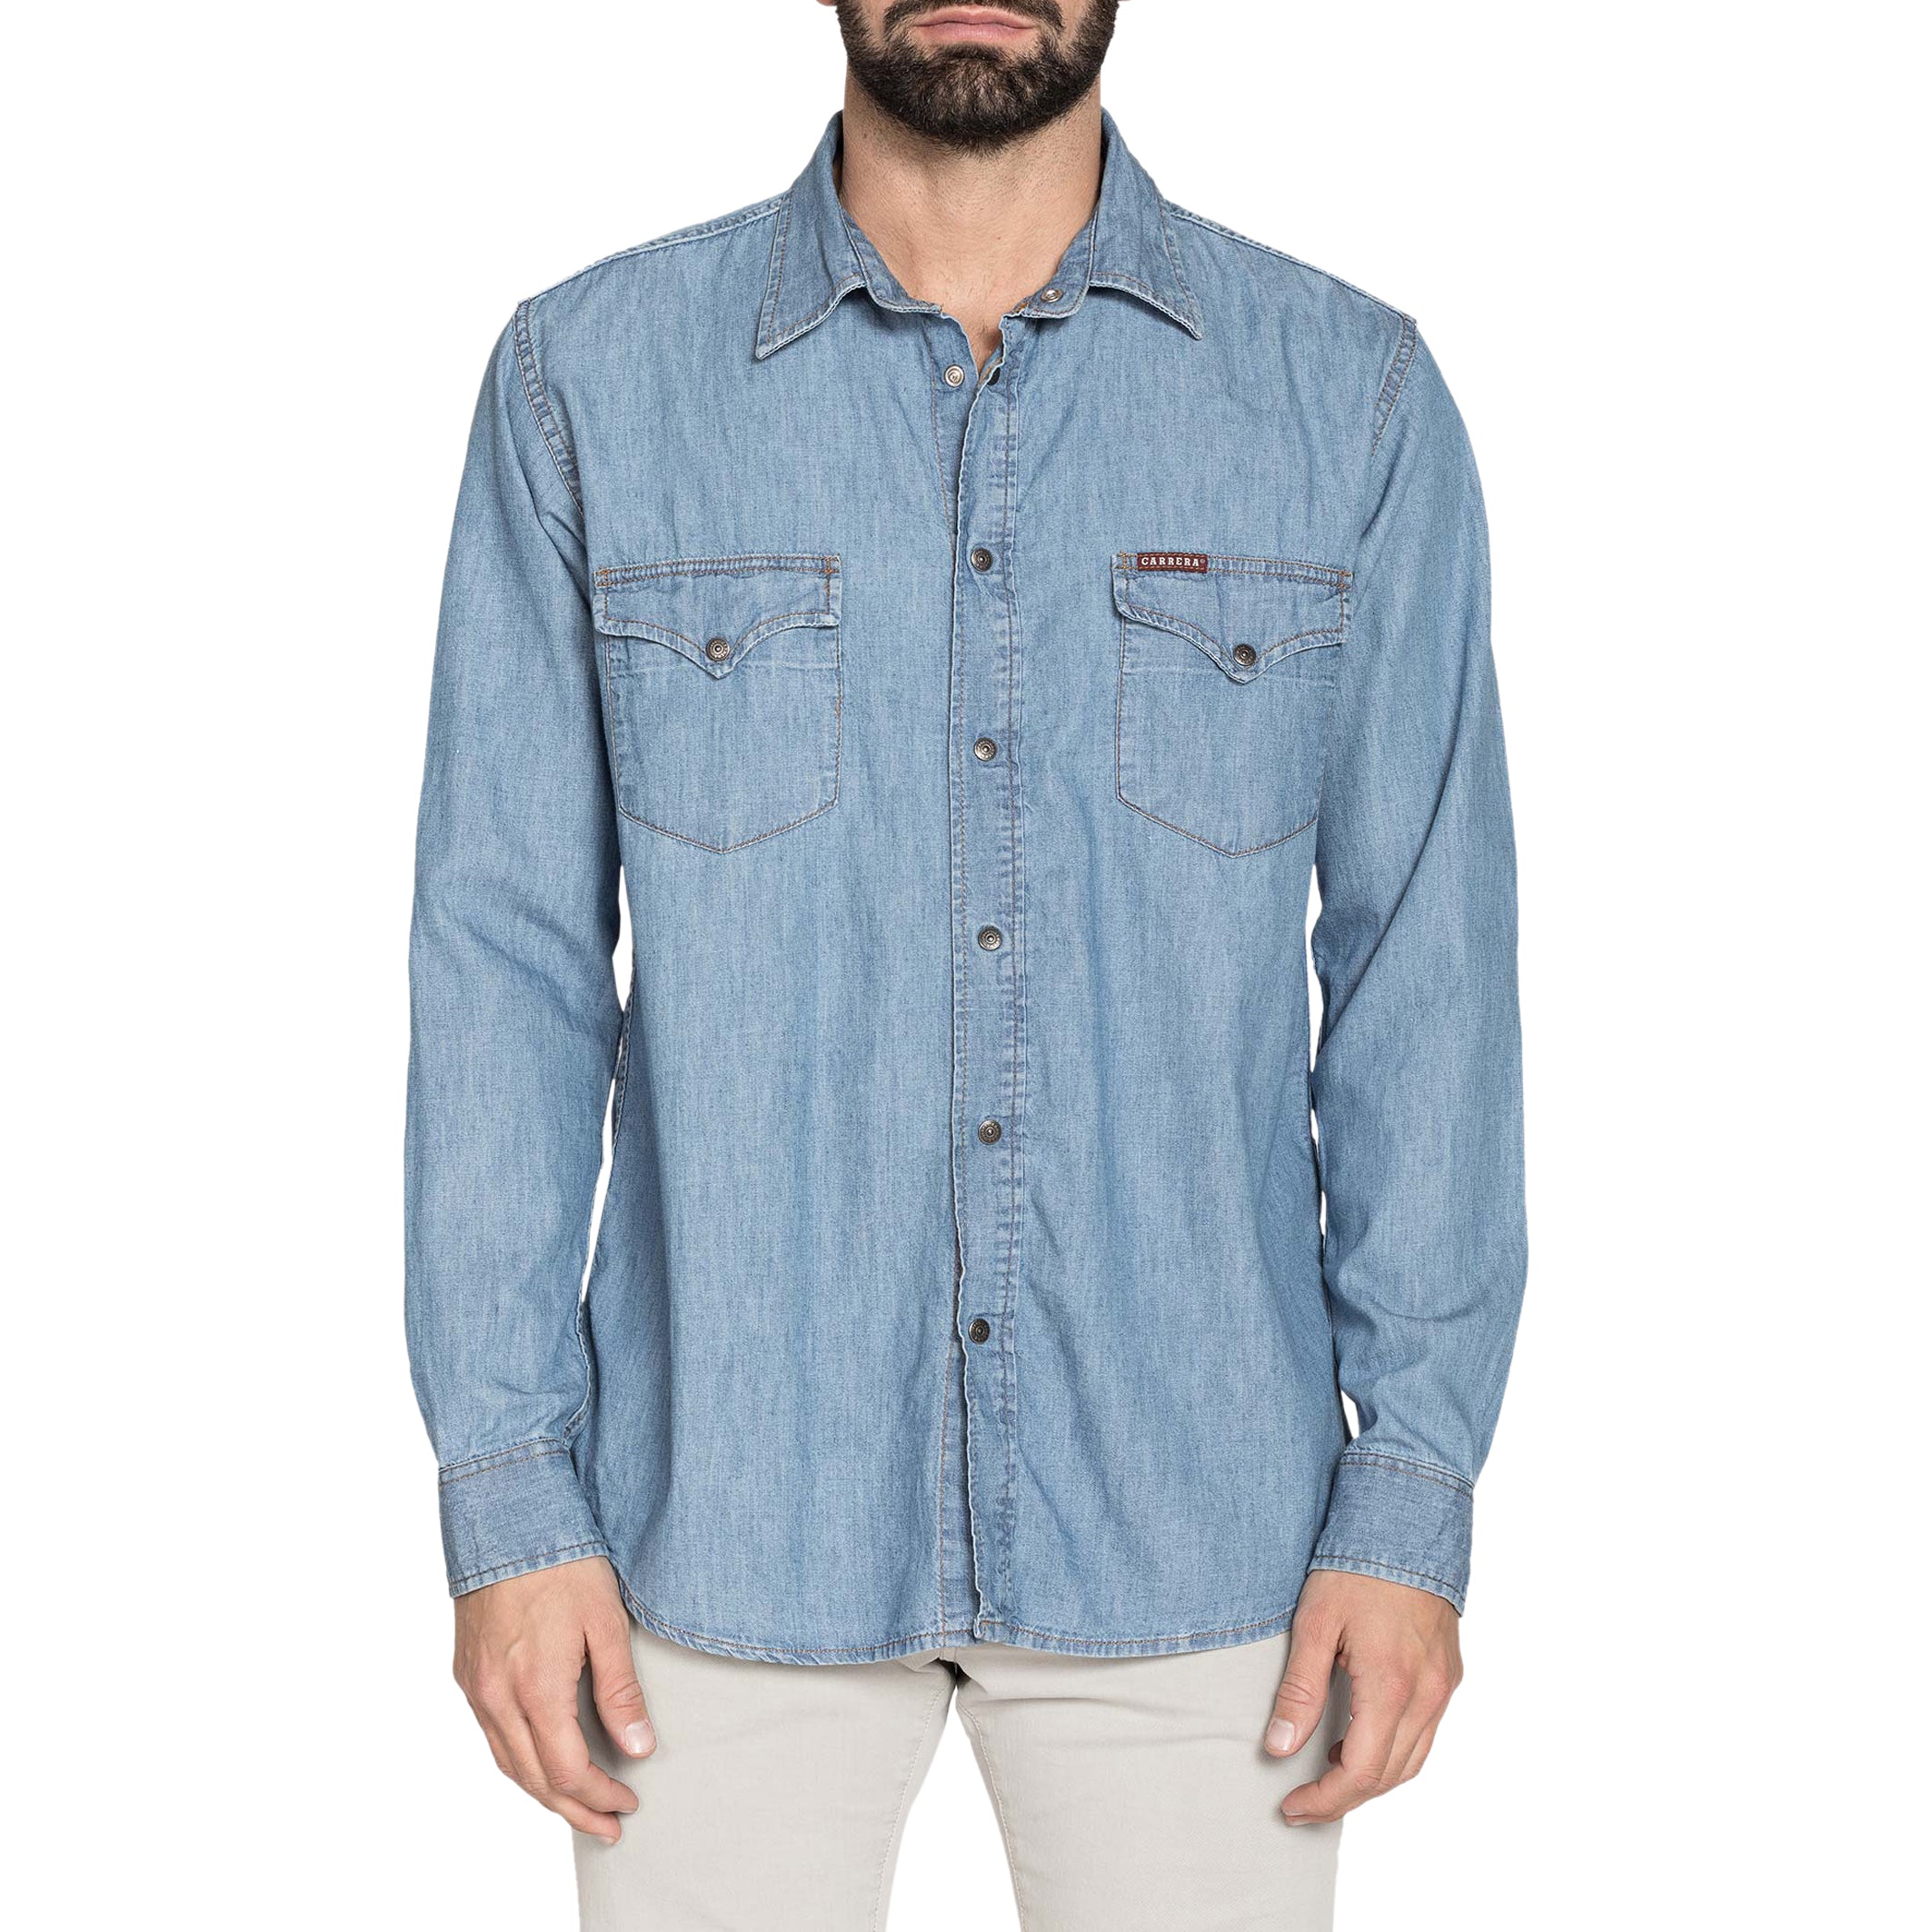 Hein? 17+ Faits sur Chemise Homme En Jean: Maybe you would like to ...